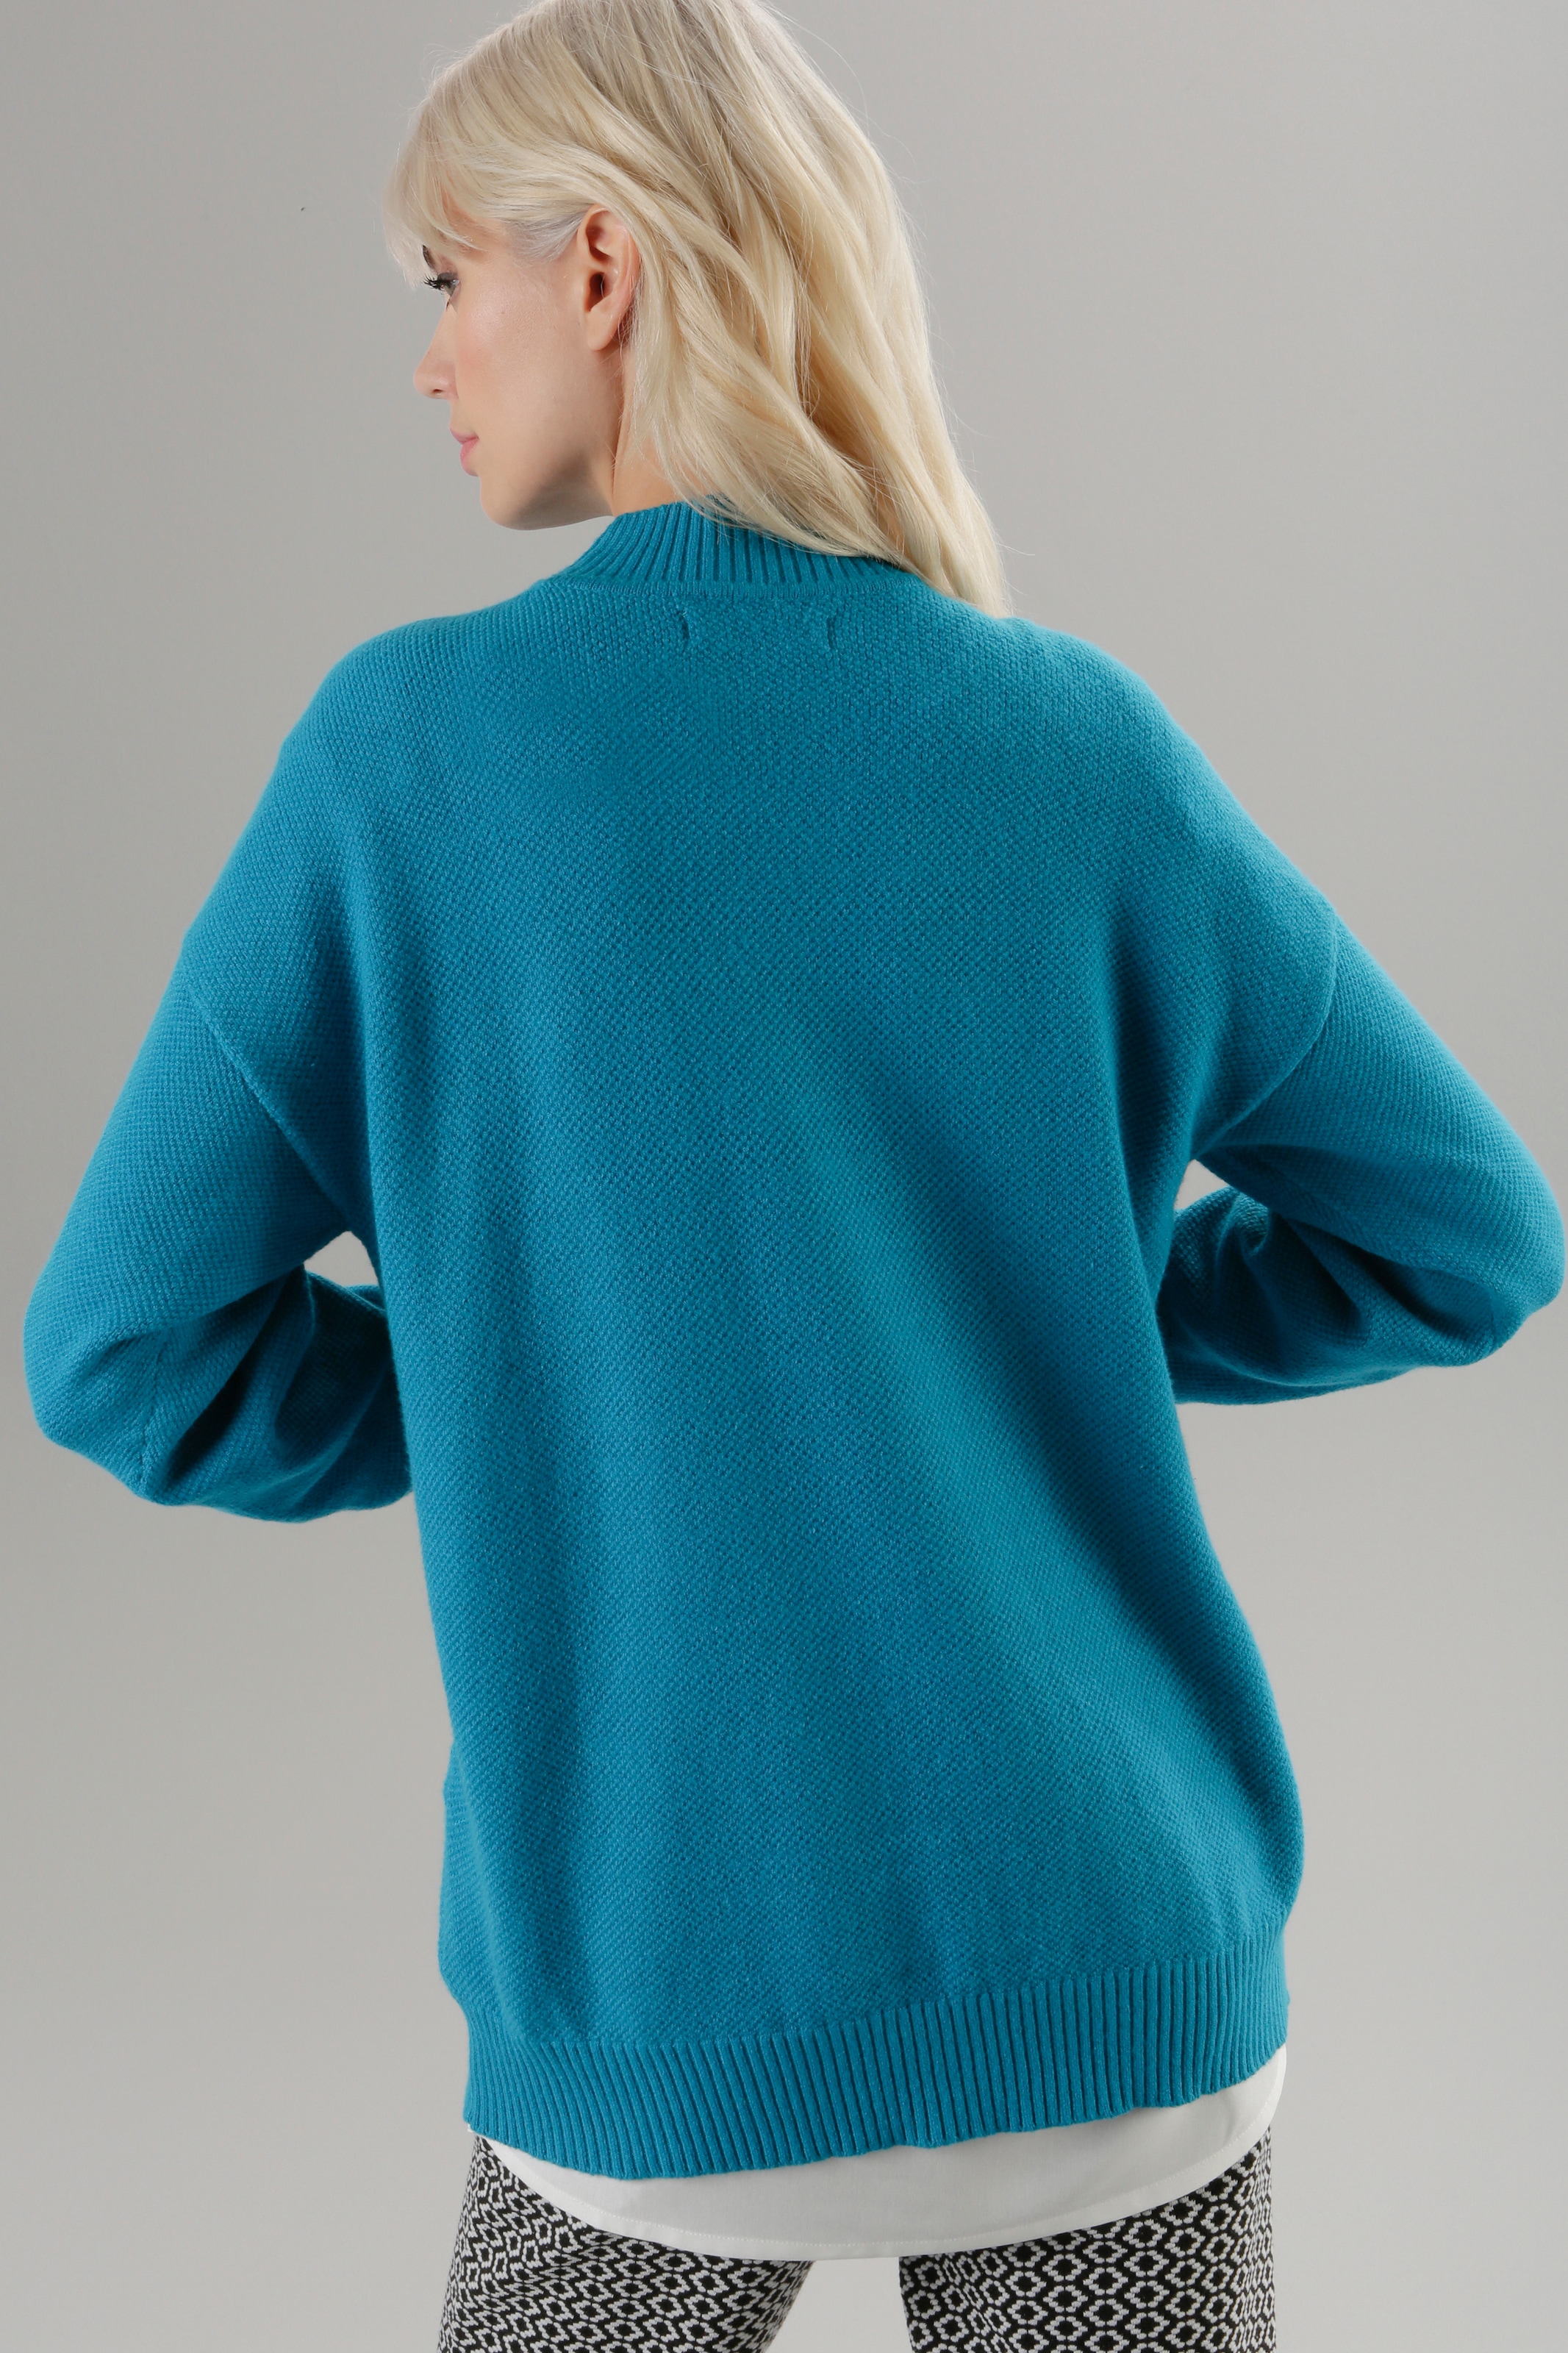 Strickpullover, Aniston SELECTED Perlfangmuster online feinem bei mit